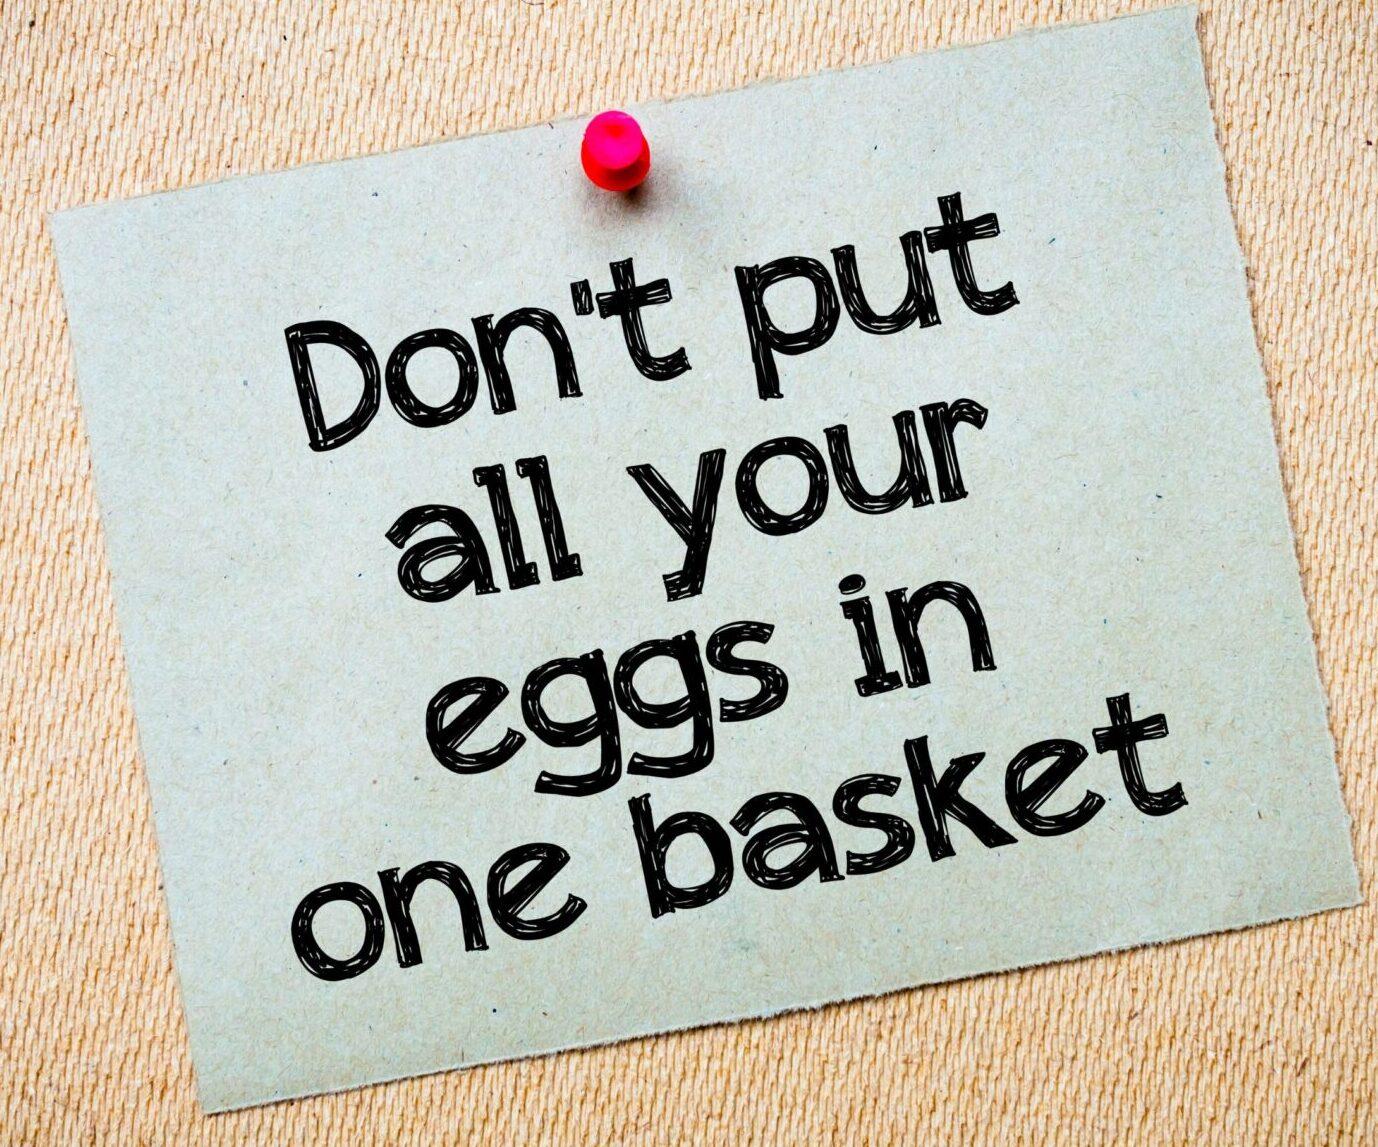 Don't put your all eggs-in one basket